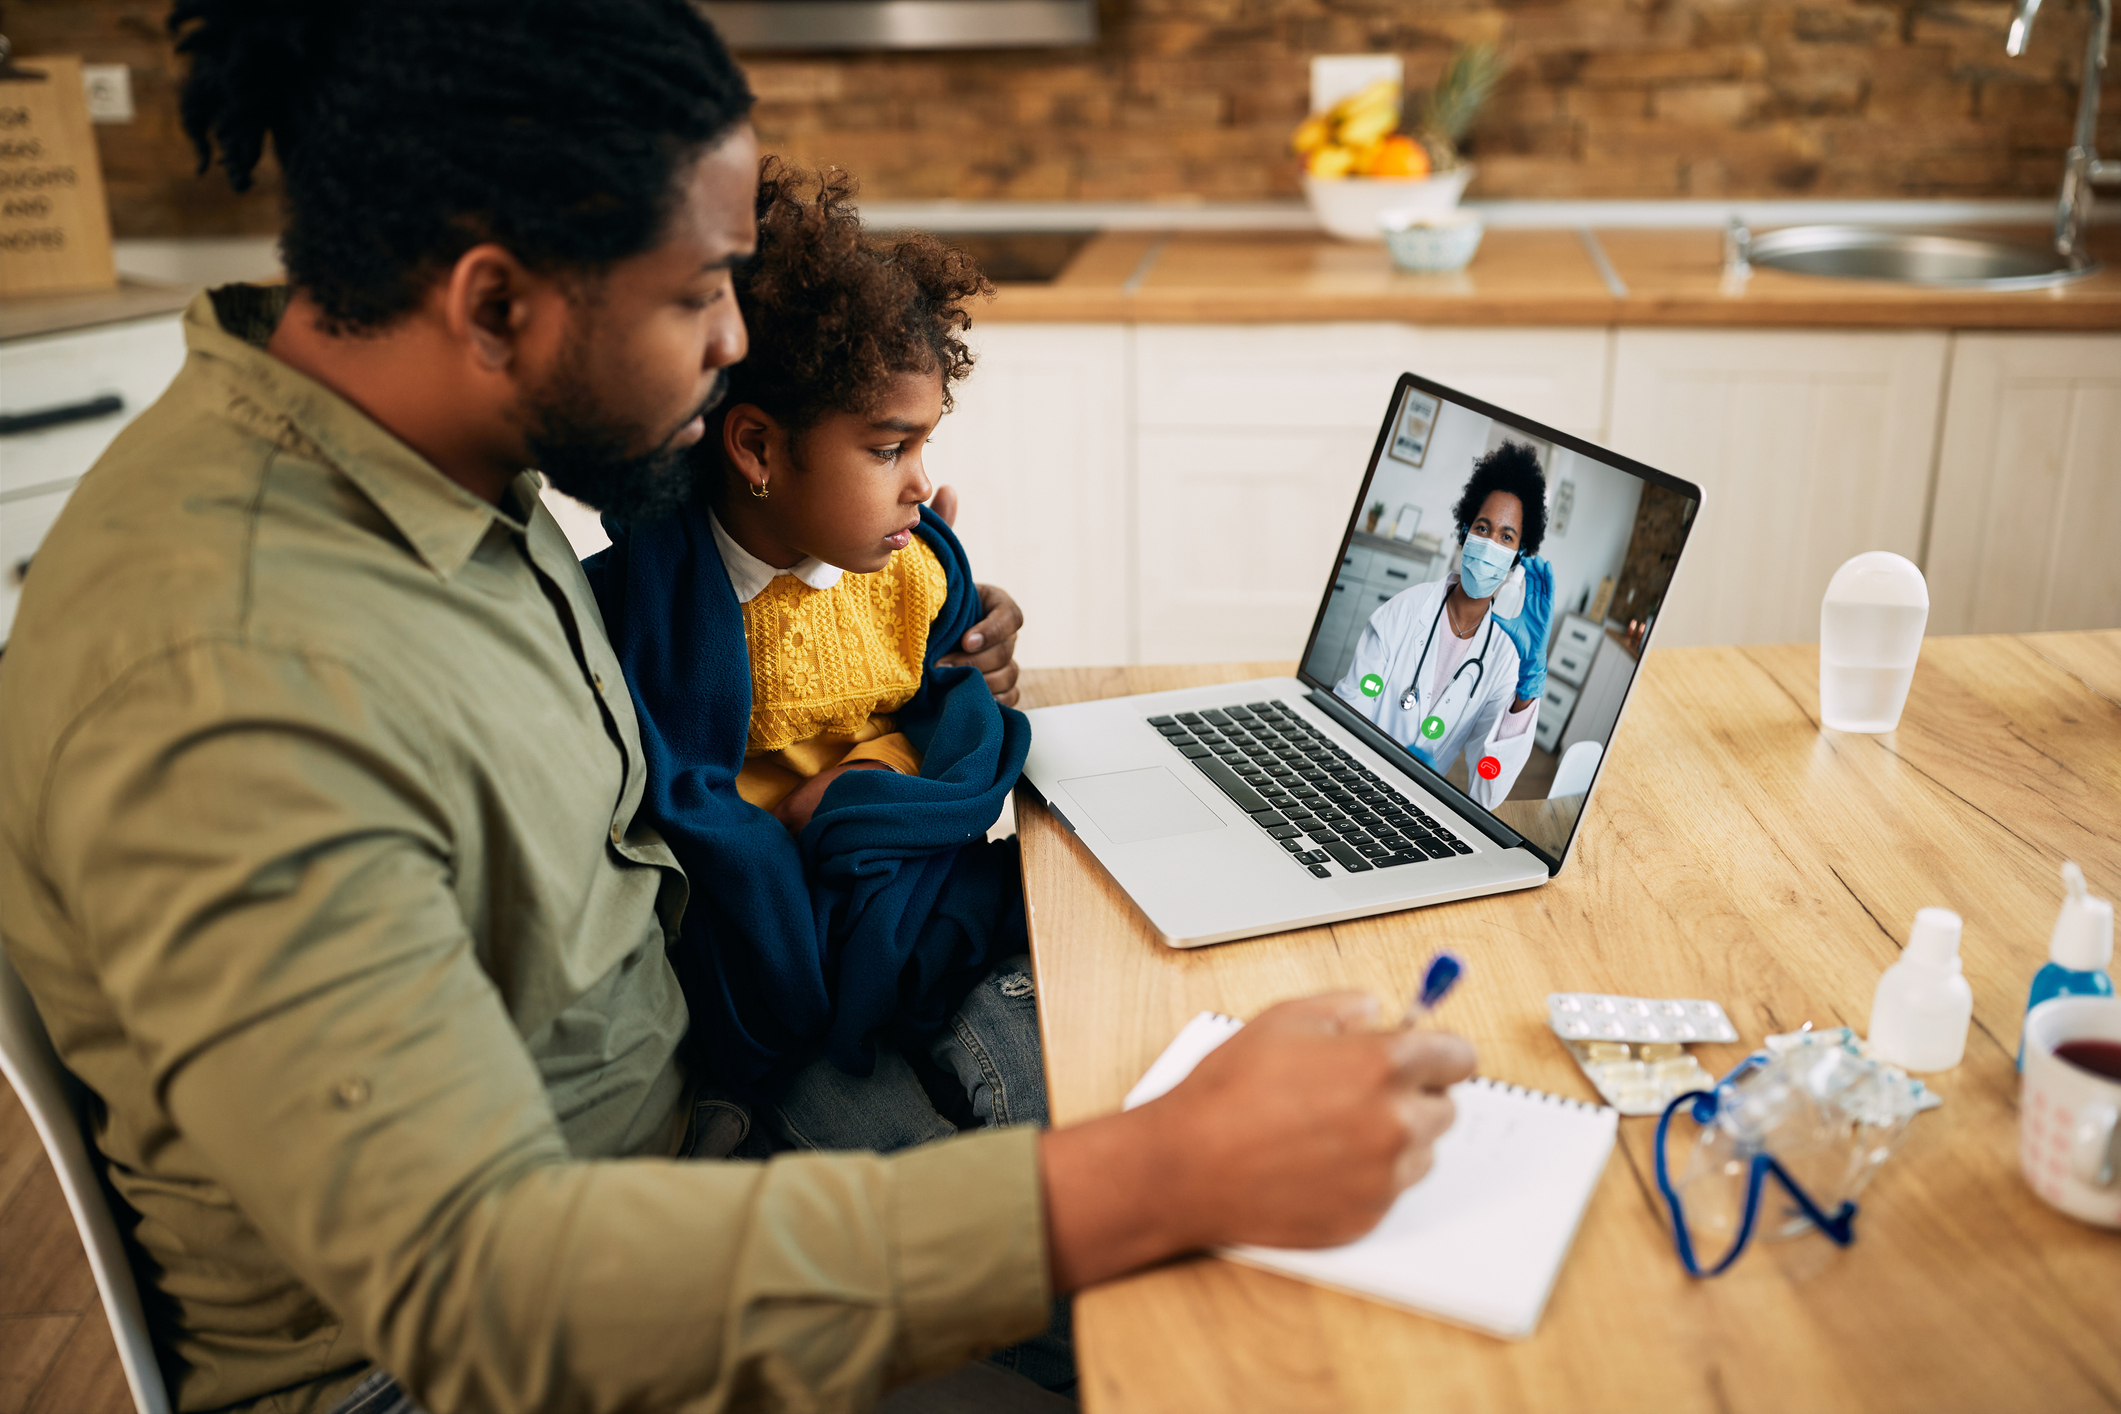 inDEPTH: The Value of Telehealth